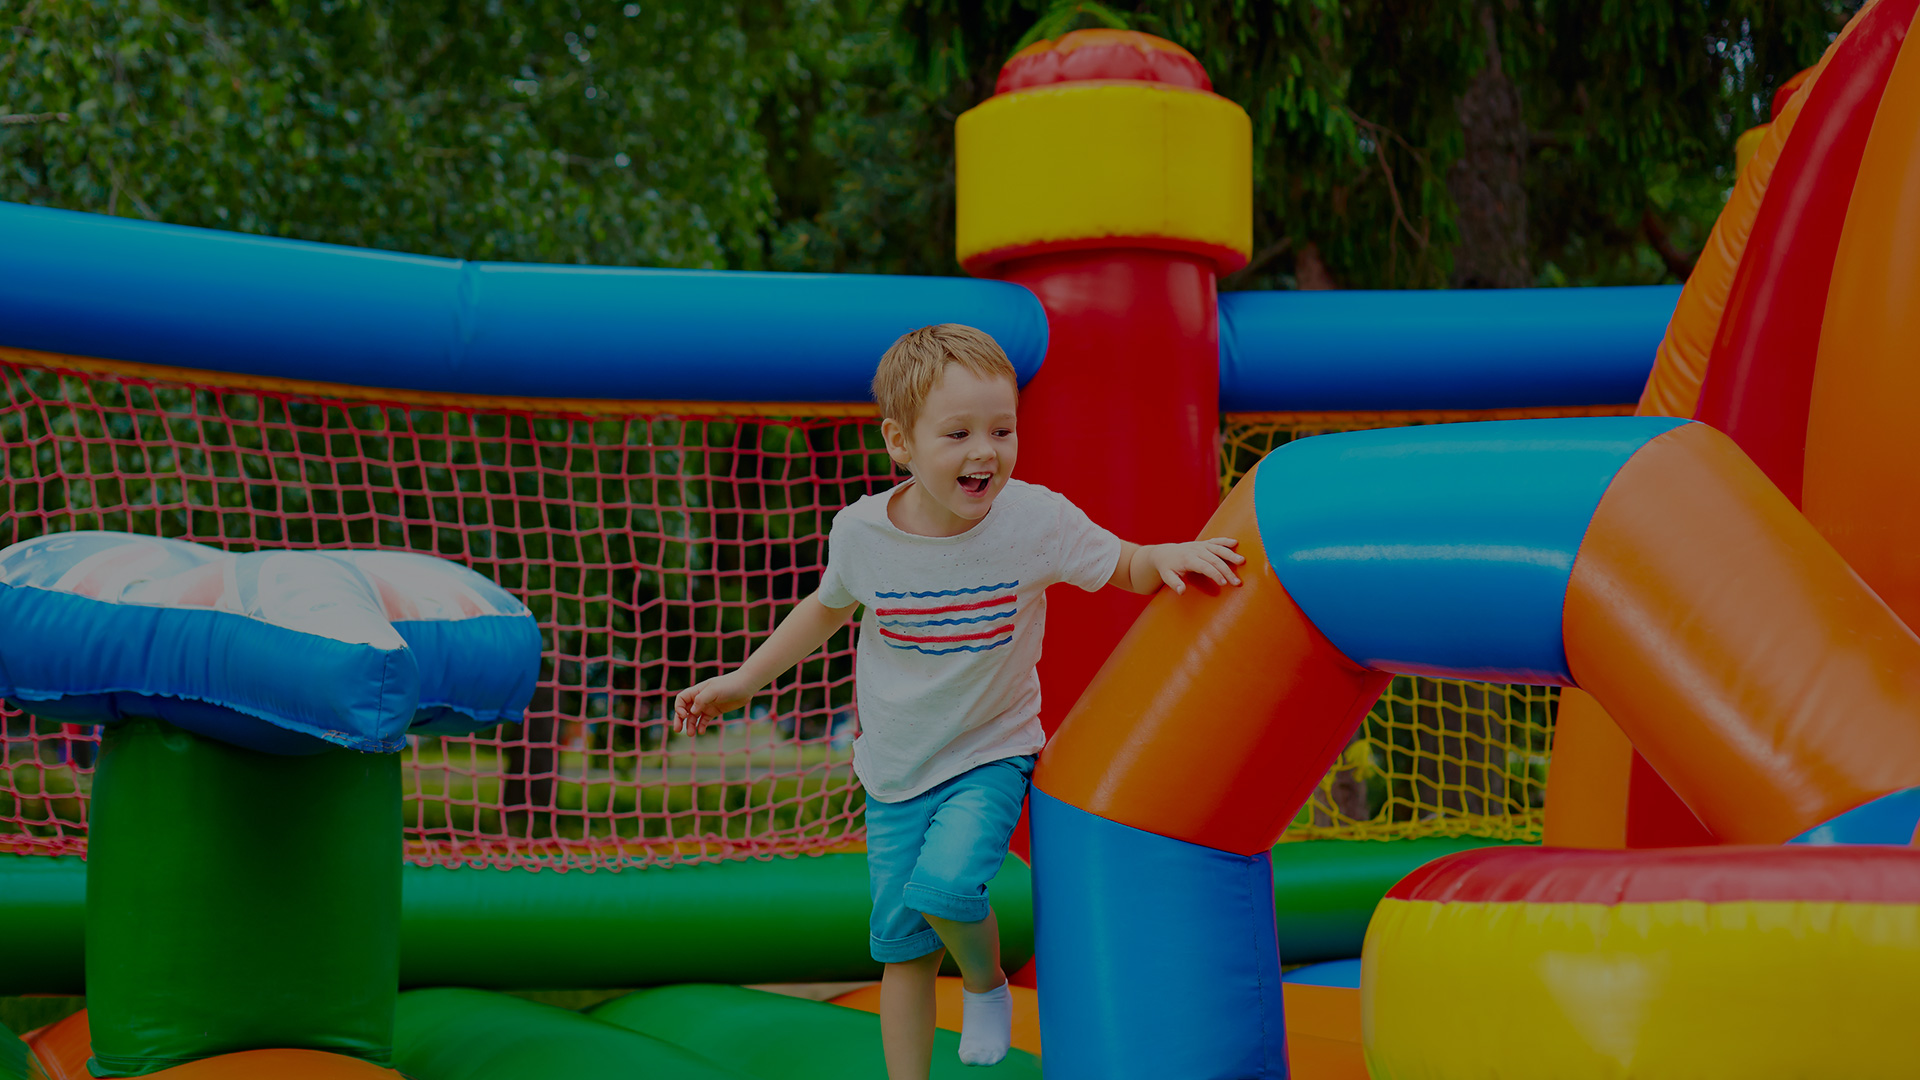 Kids jumping castles will bring out the potential in your child